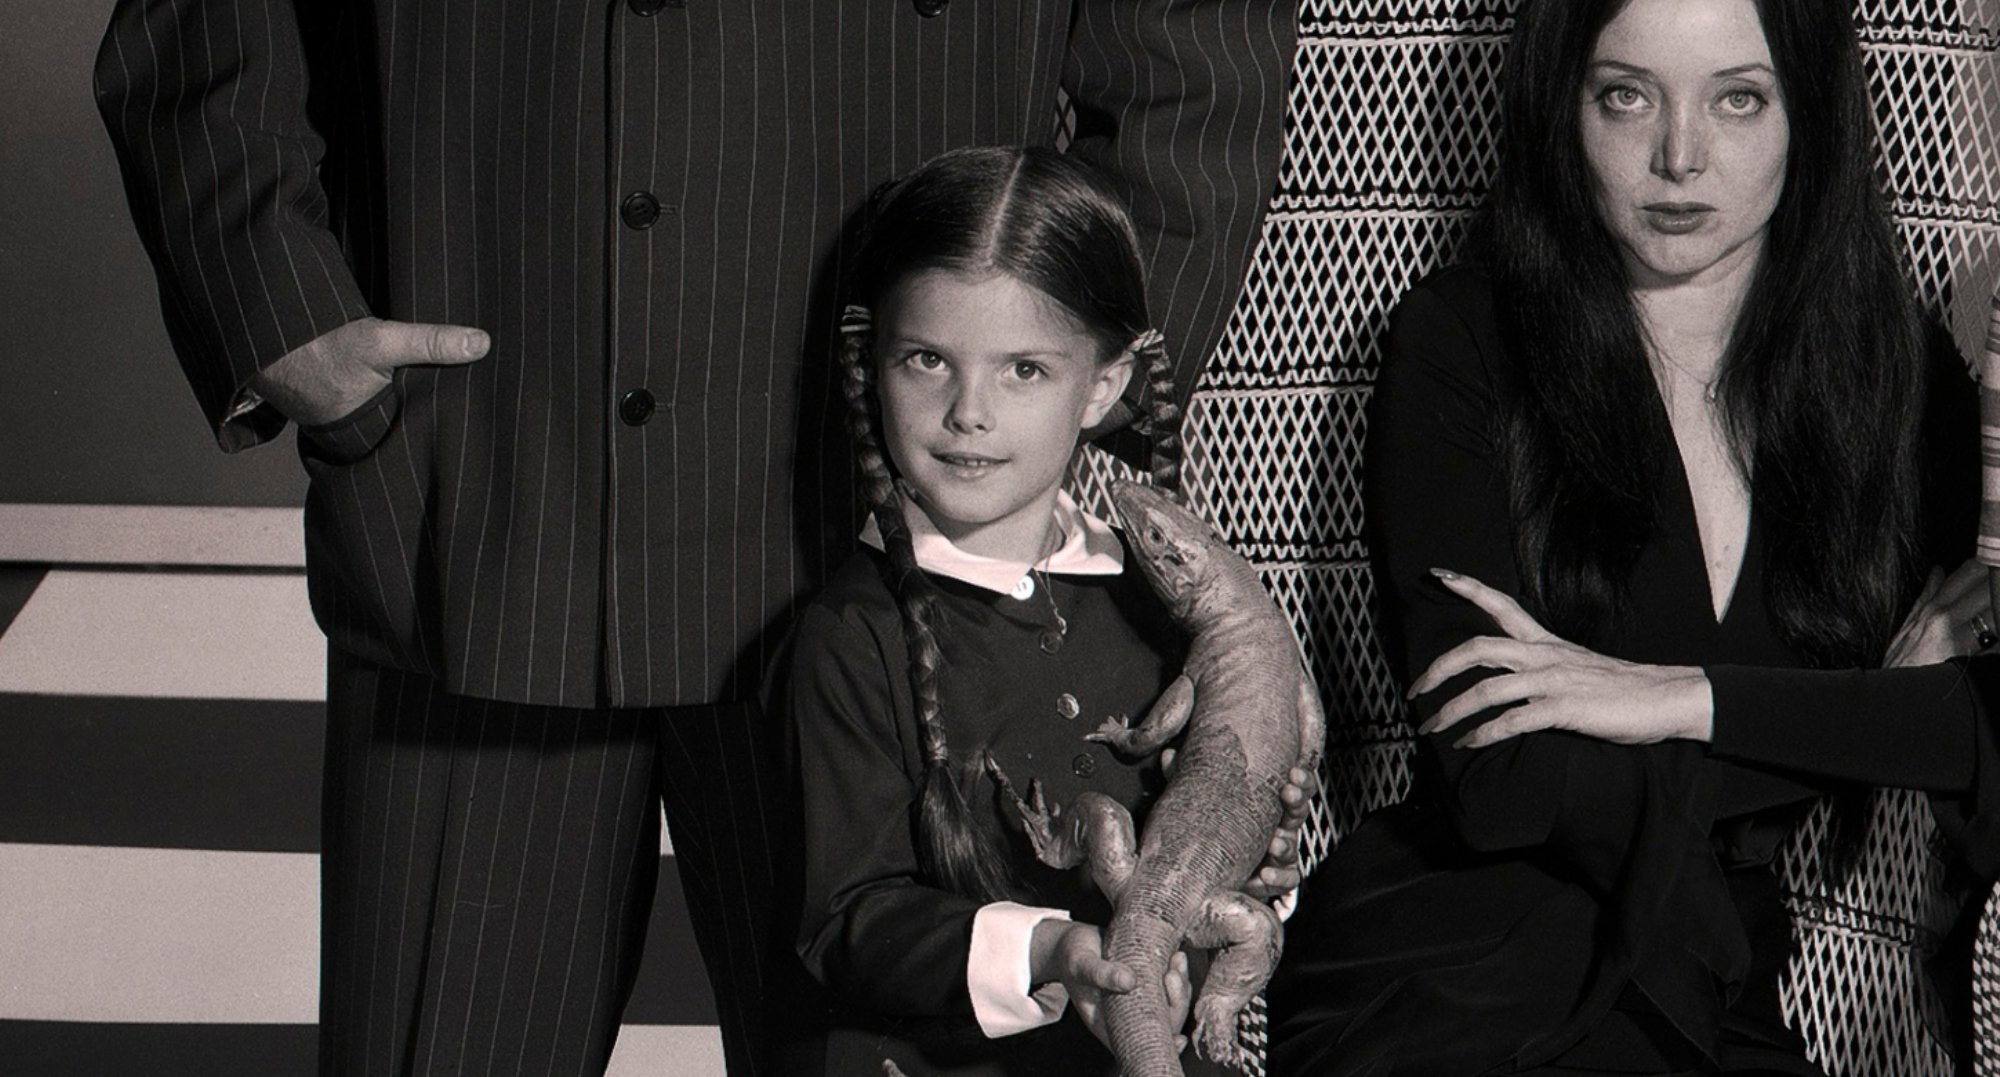 ‘The Addams Family’: Who Played the Original Wednesday Addams?